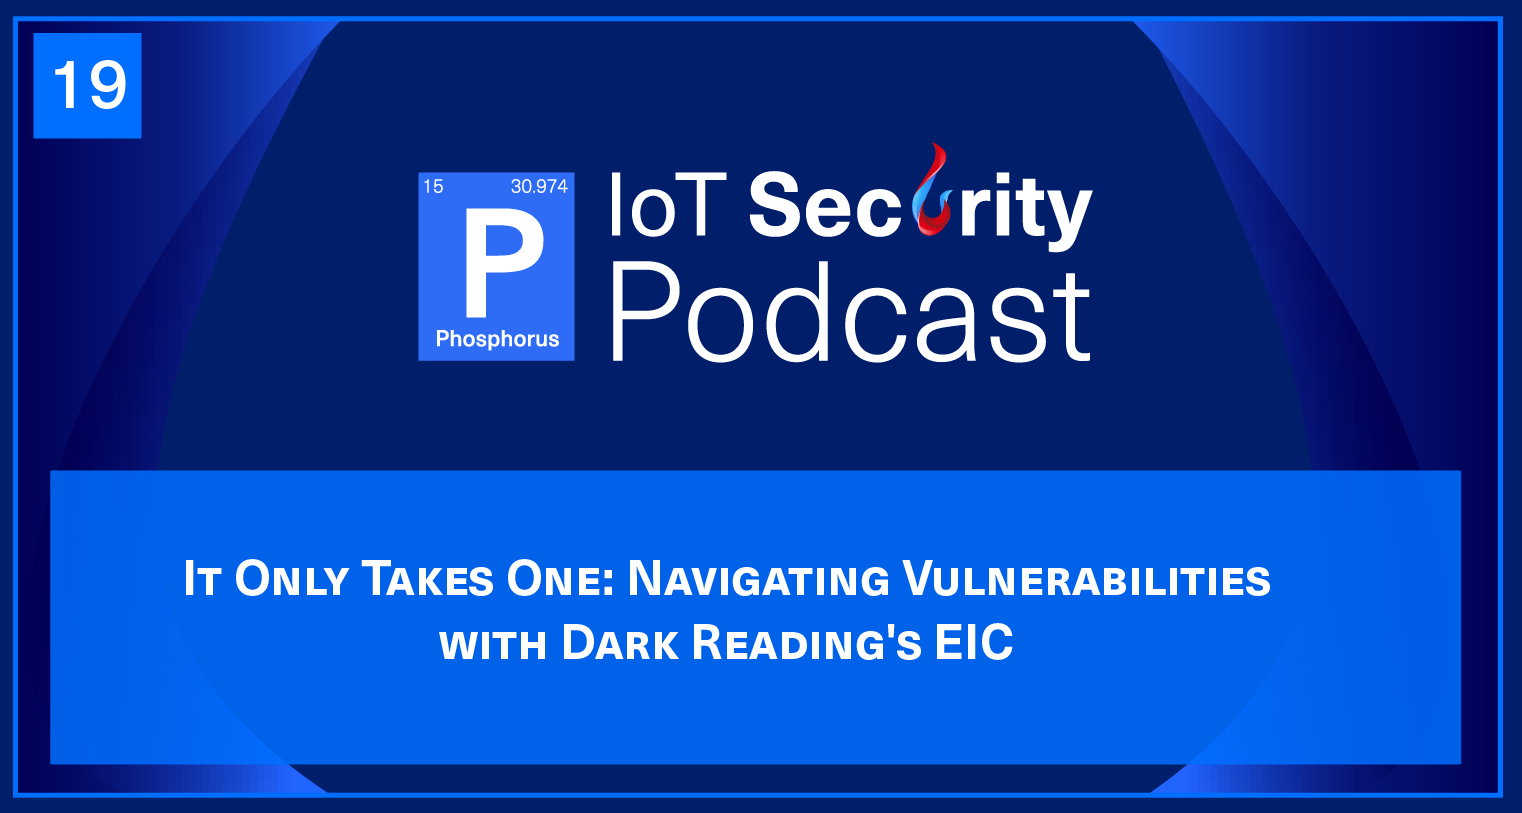 It Only Takes One: Navigating Vulnerabilities with Dark Reading's EIC